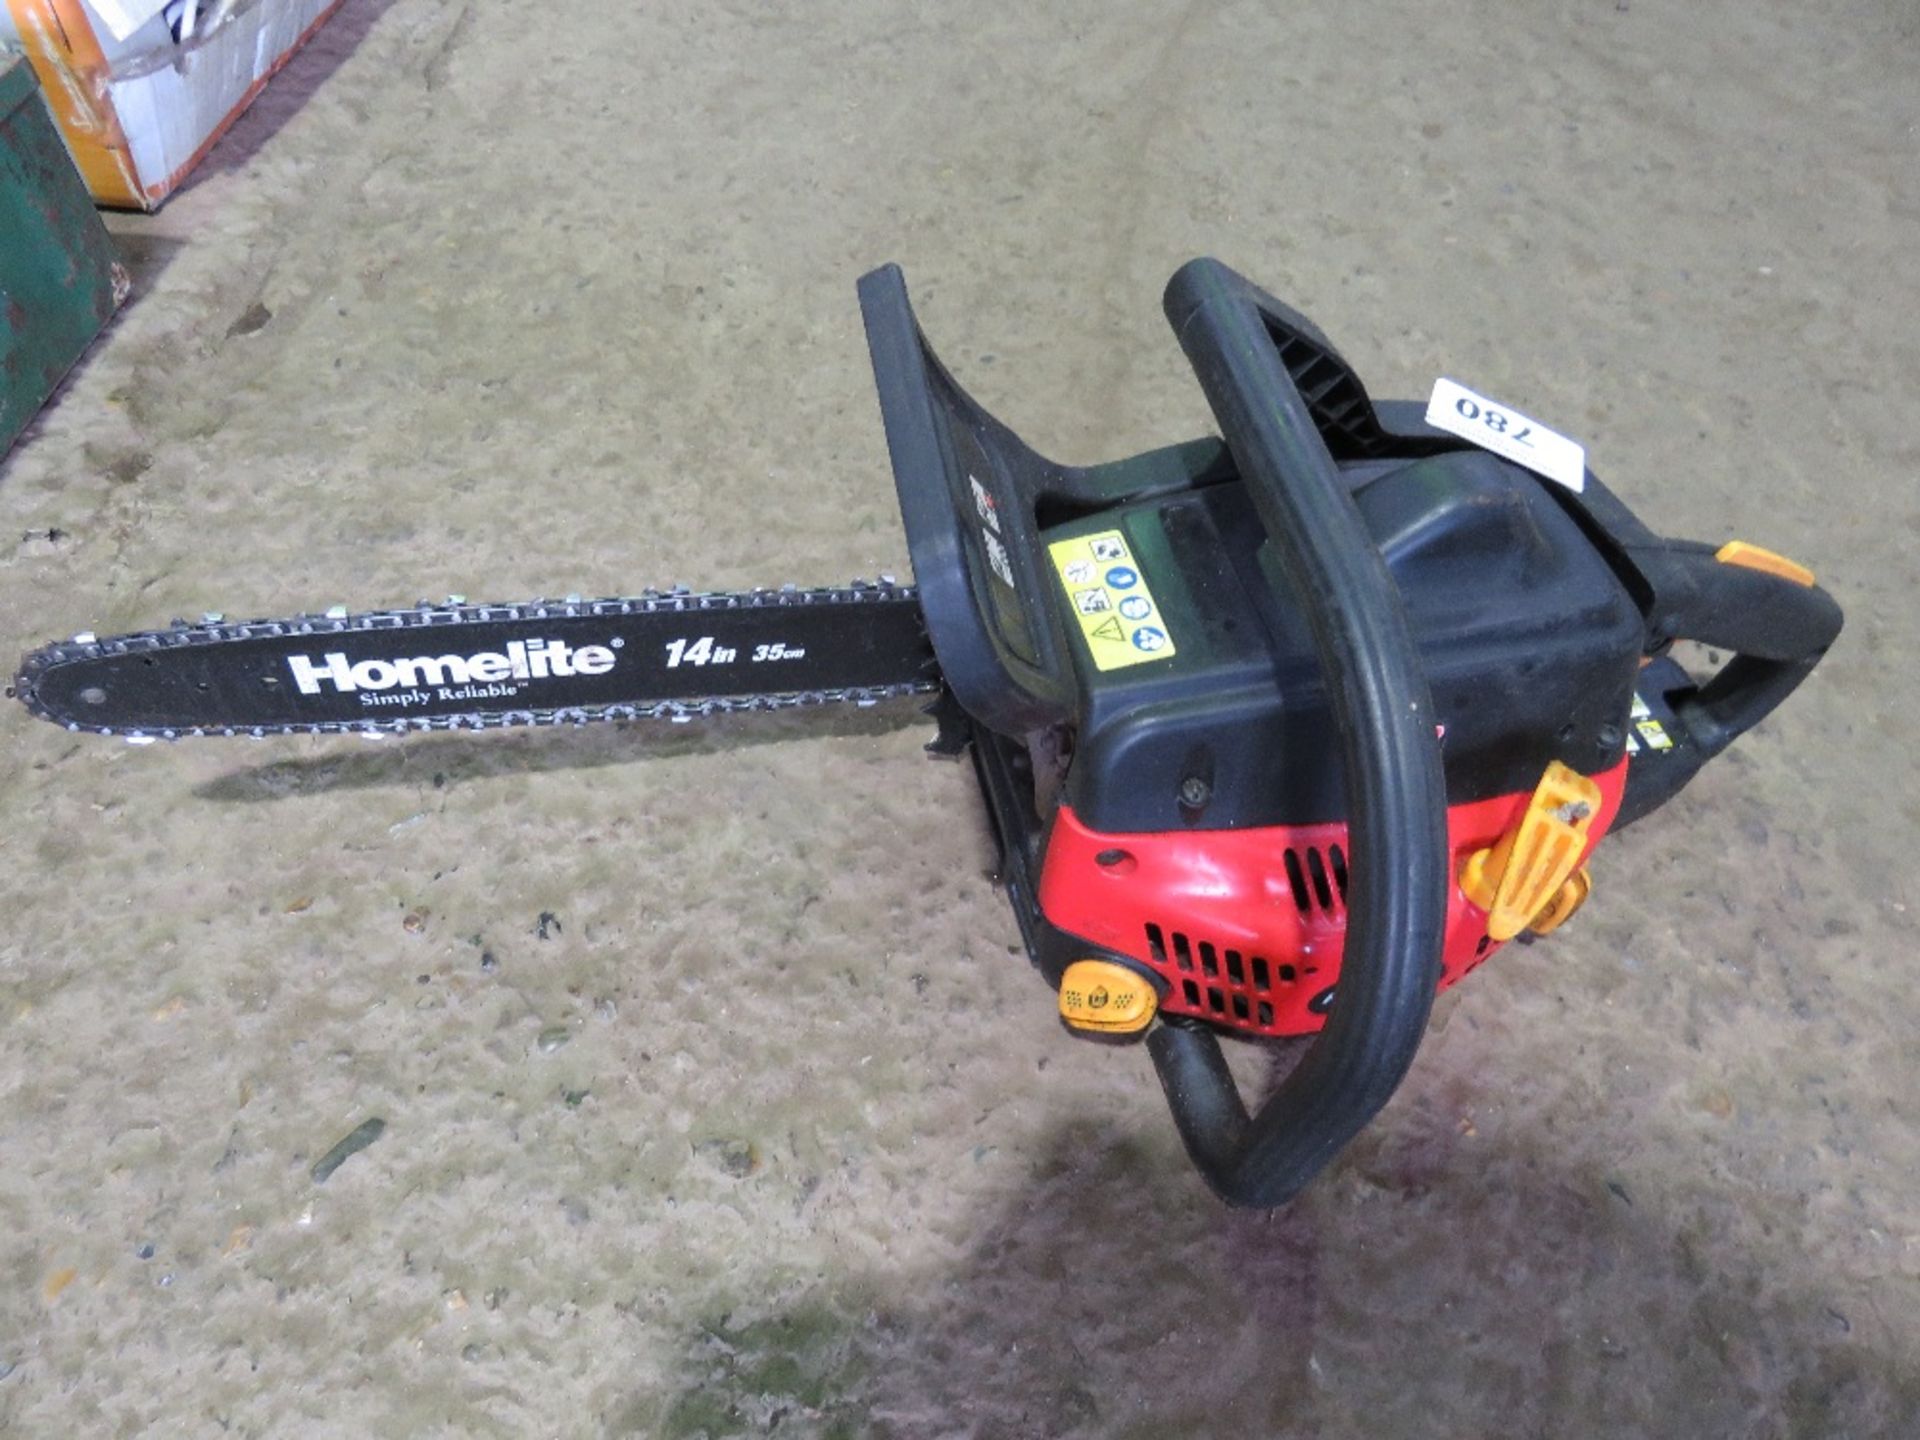 HOMELITE PETROL ENGINED CHAINSAW. DIRECT FROM WORKSHOP WHERE OWNER RETIRING. THIS LOT IS SOLD UN - Image 2 of 3